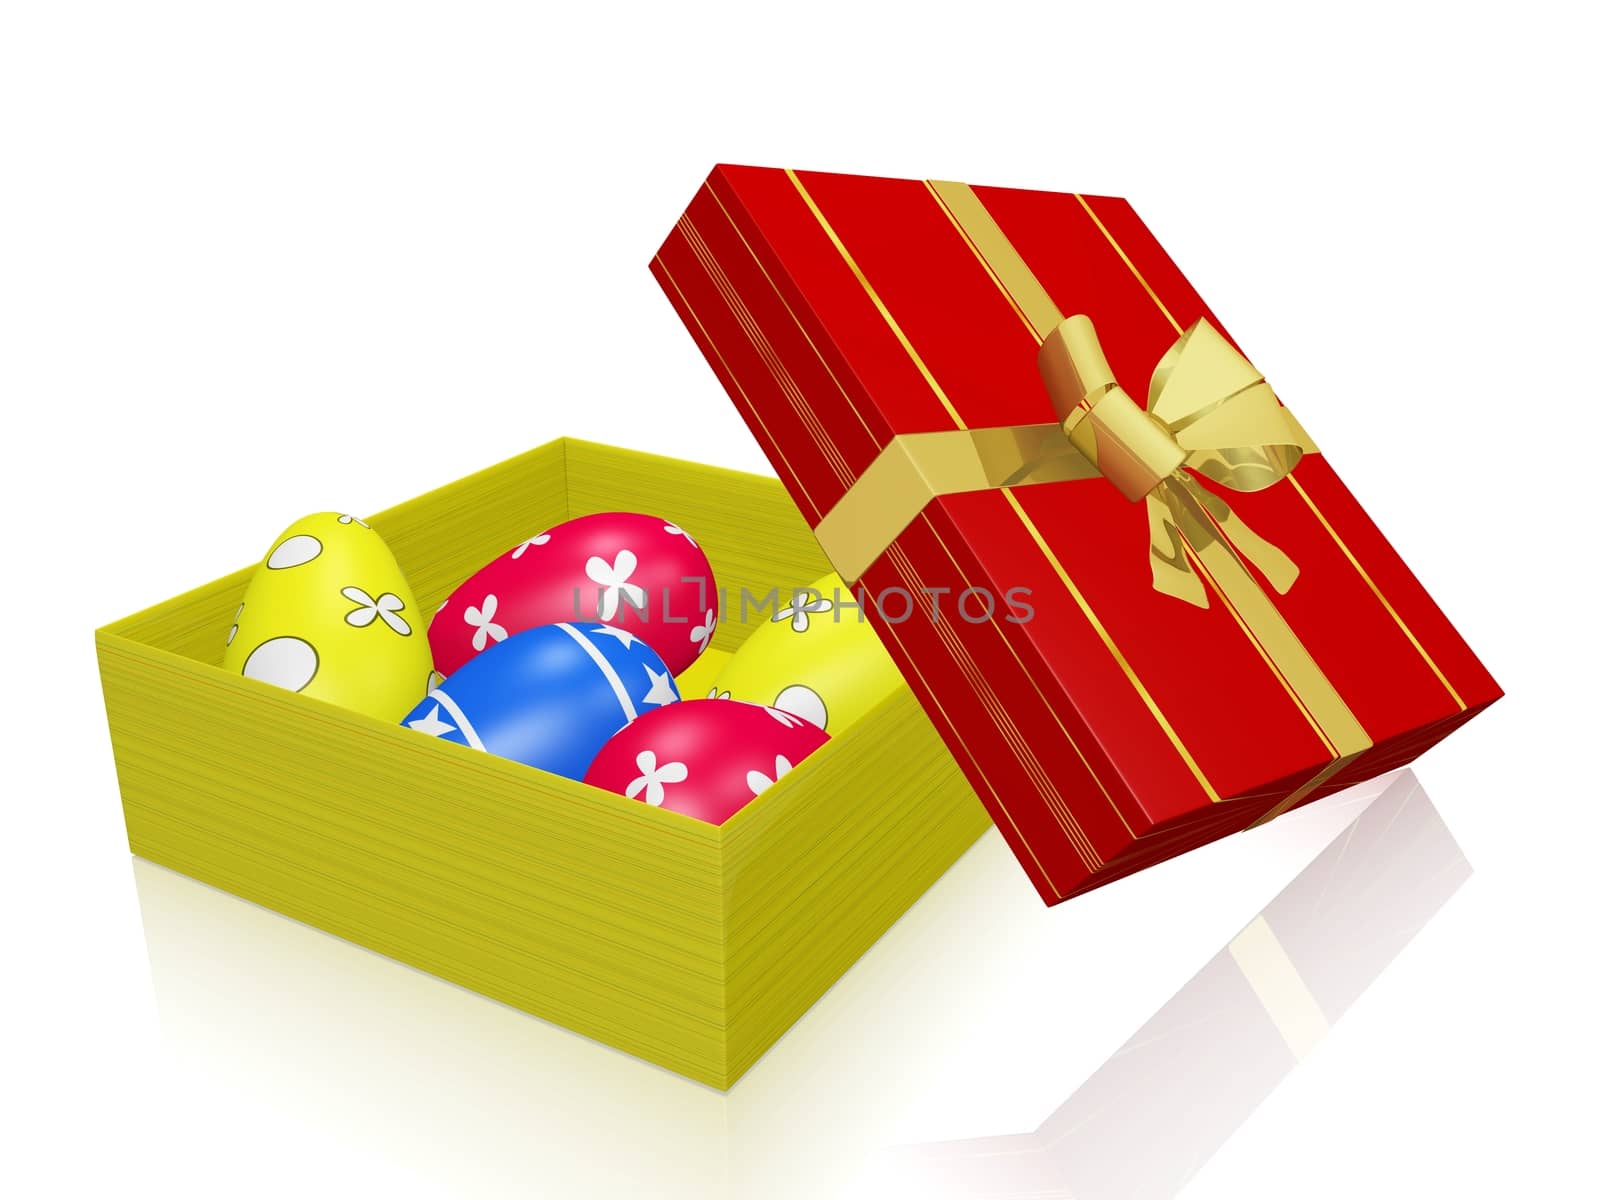 Painted Easter Eggs in Gift Box with Gold Bow Ribbon by RichieThakur